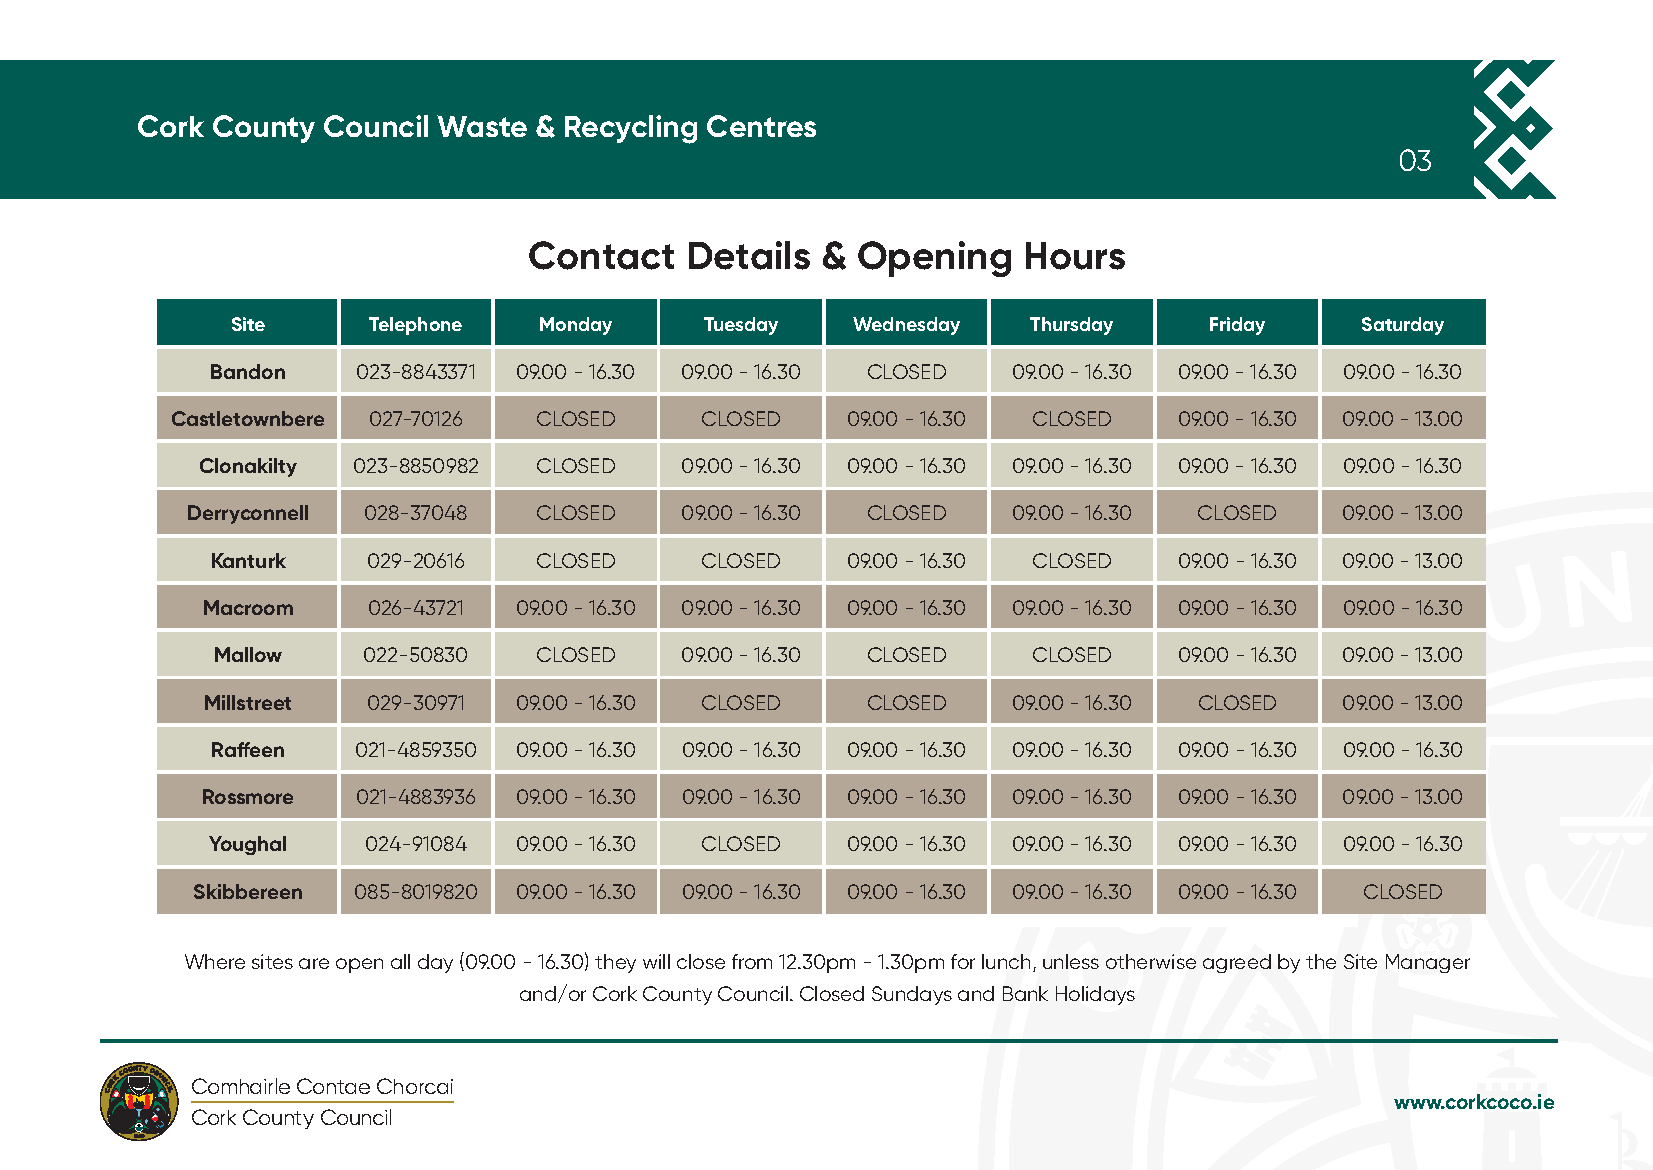 Civic Amenity Site locations and opening hours